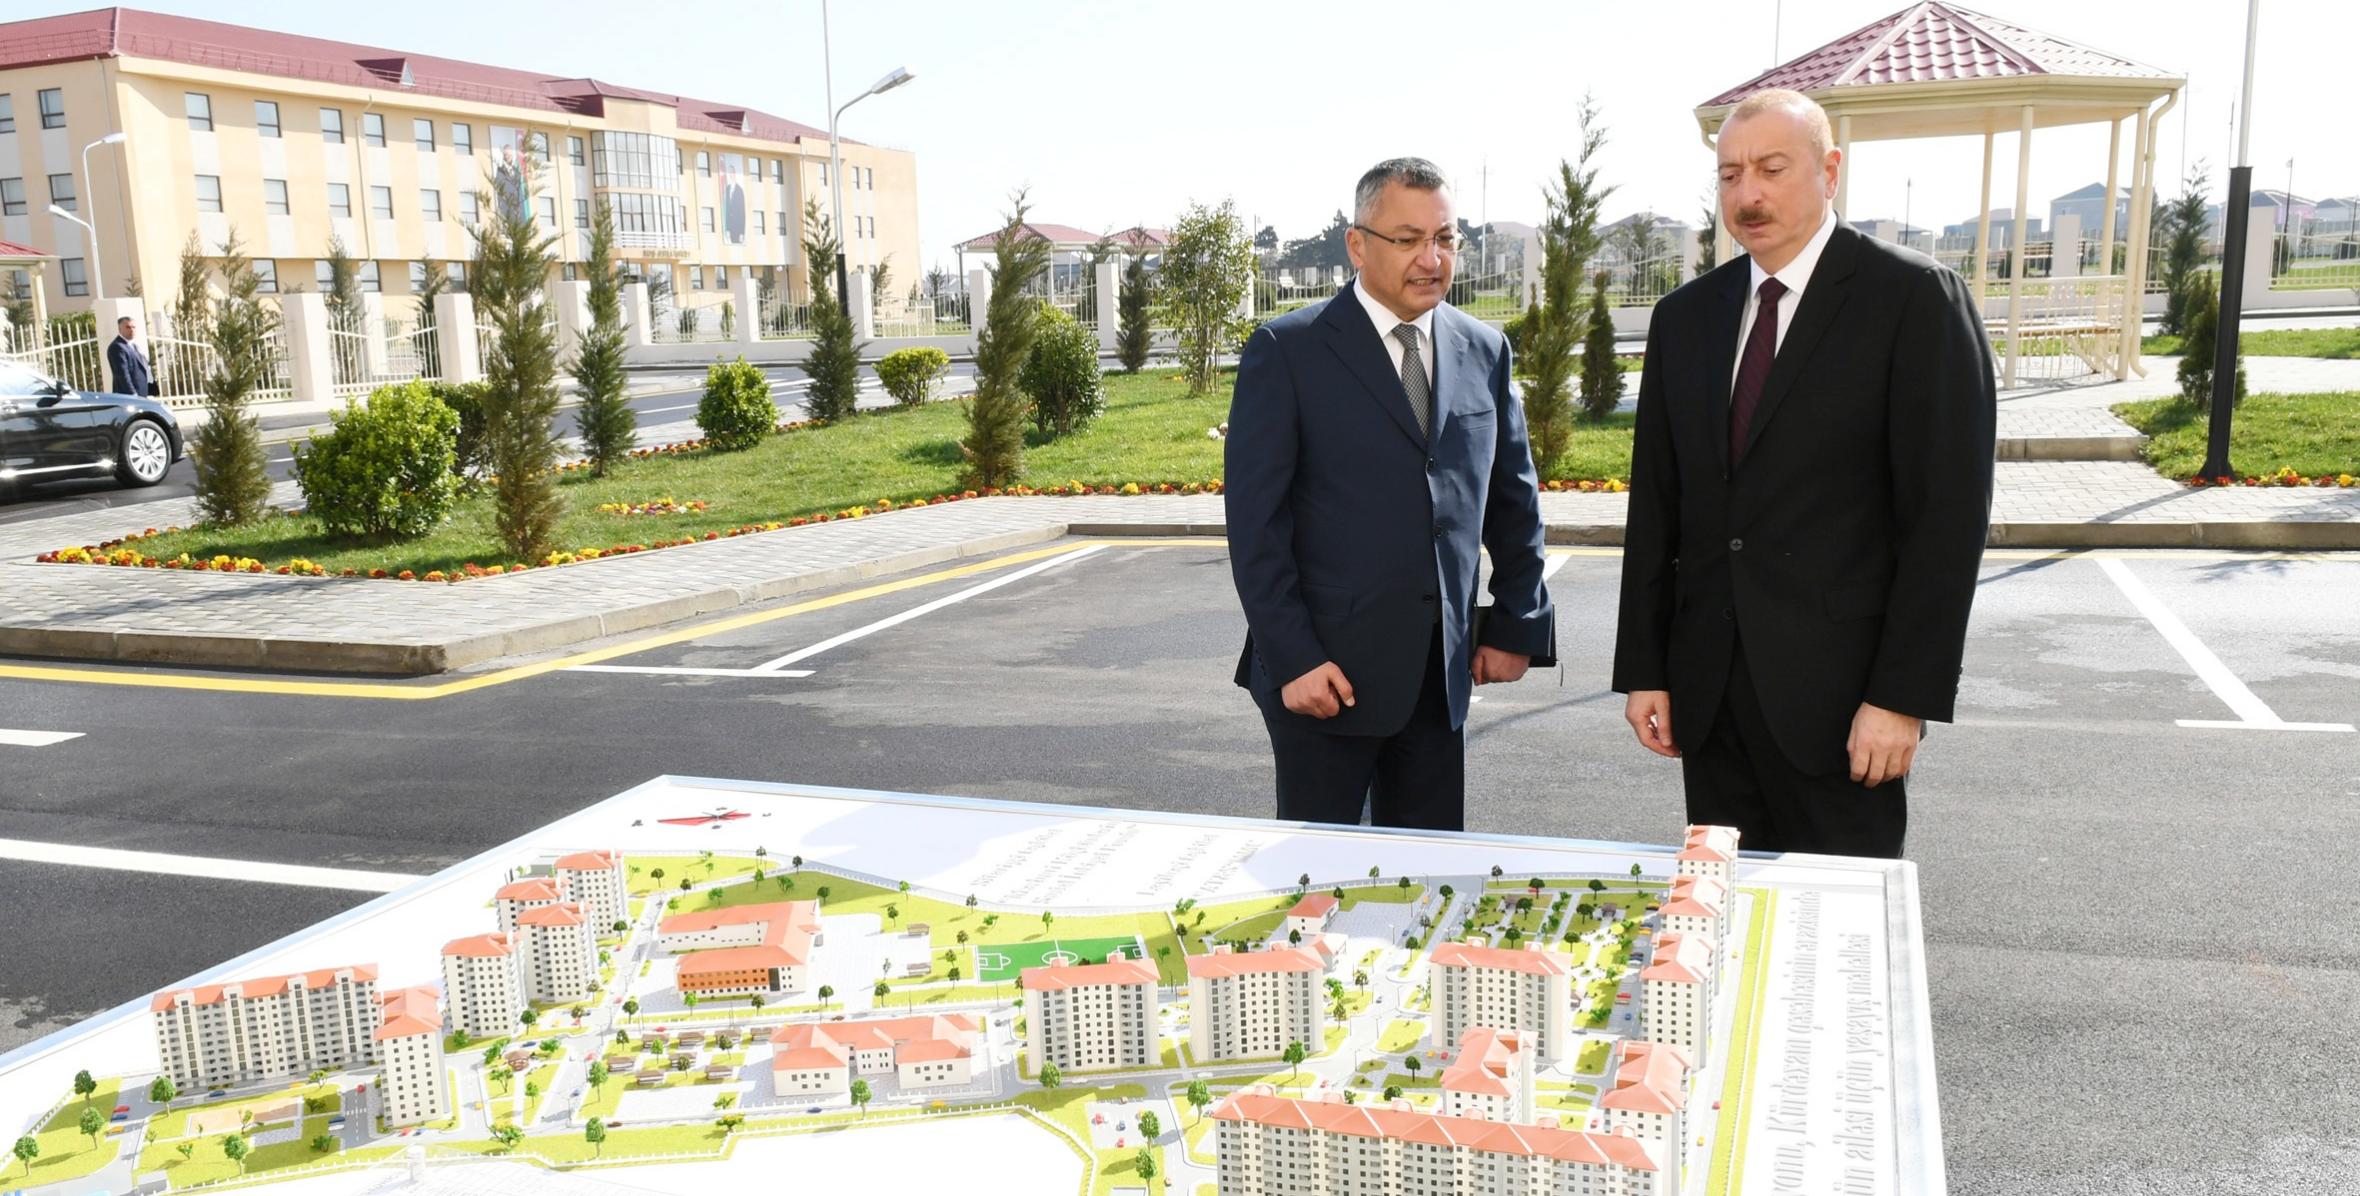 Ilham Aliyev attended opening of new residential complex for IDP families in Kurdakhani settlement, Baku